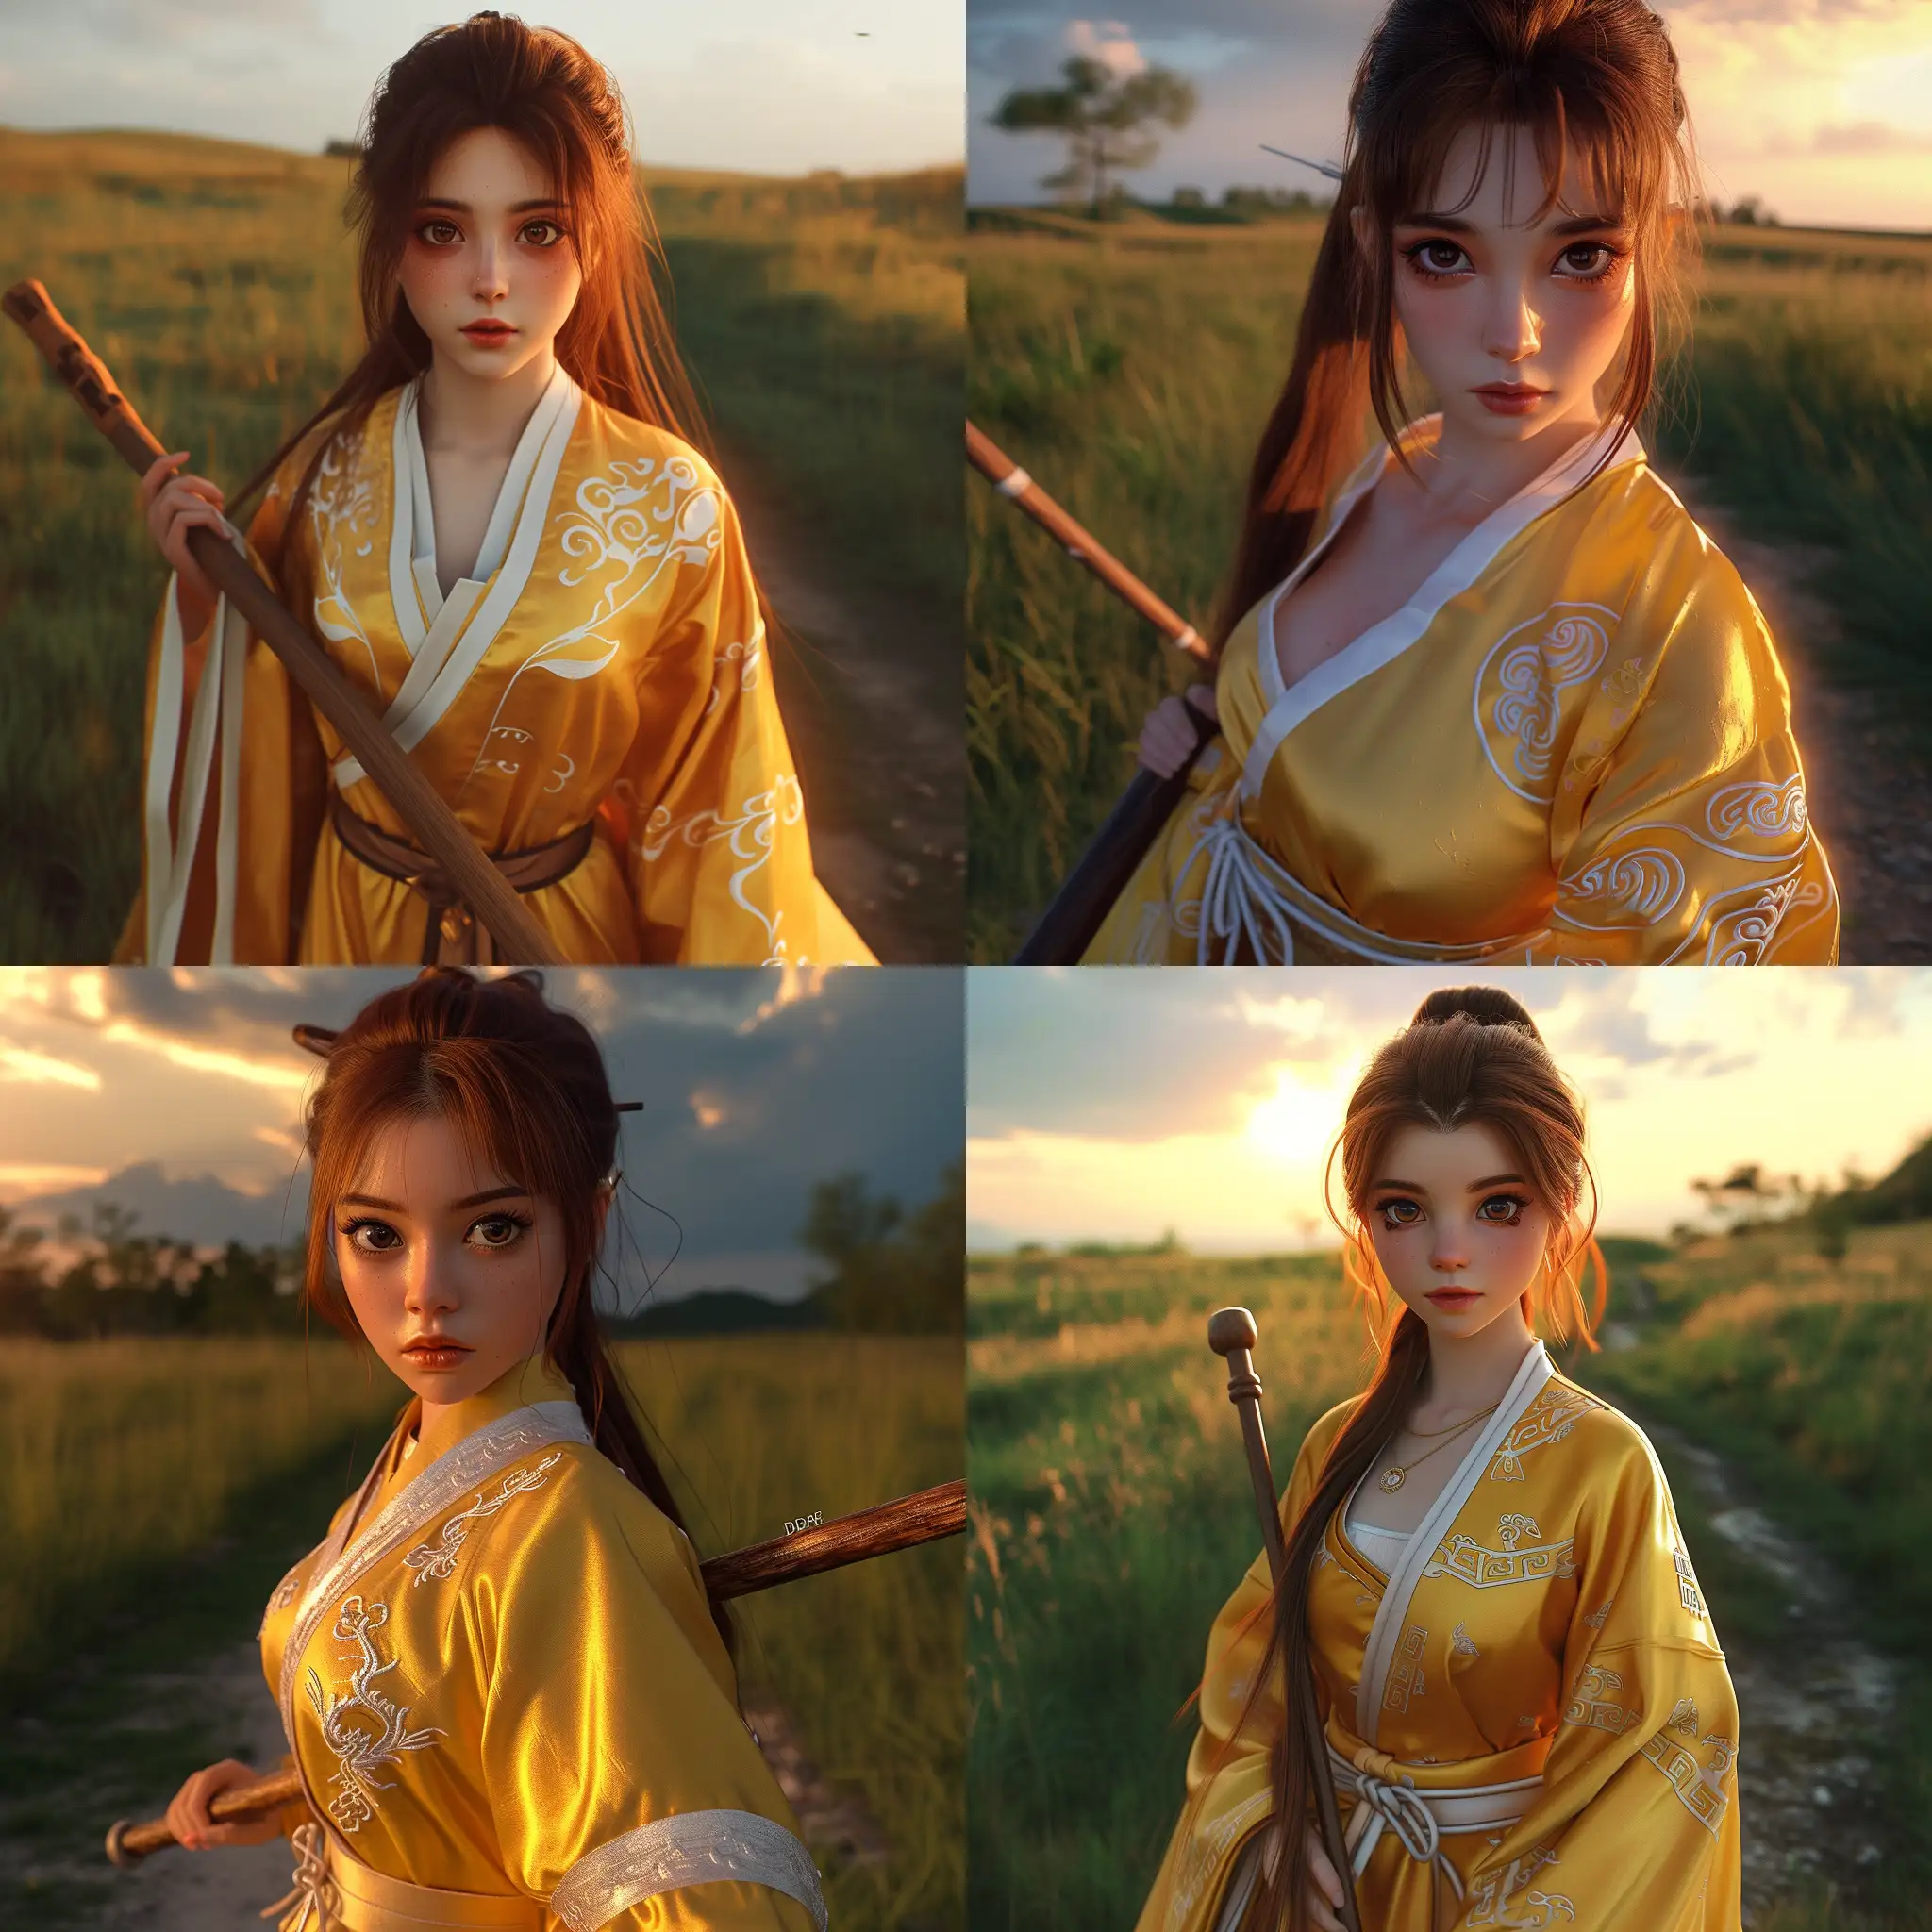 Stunning-Asian-Warrior-Woman-in-Silky-Yellow-Robe-Holding-Wooden-Staff